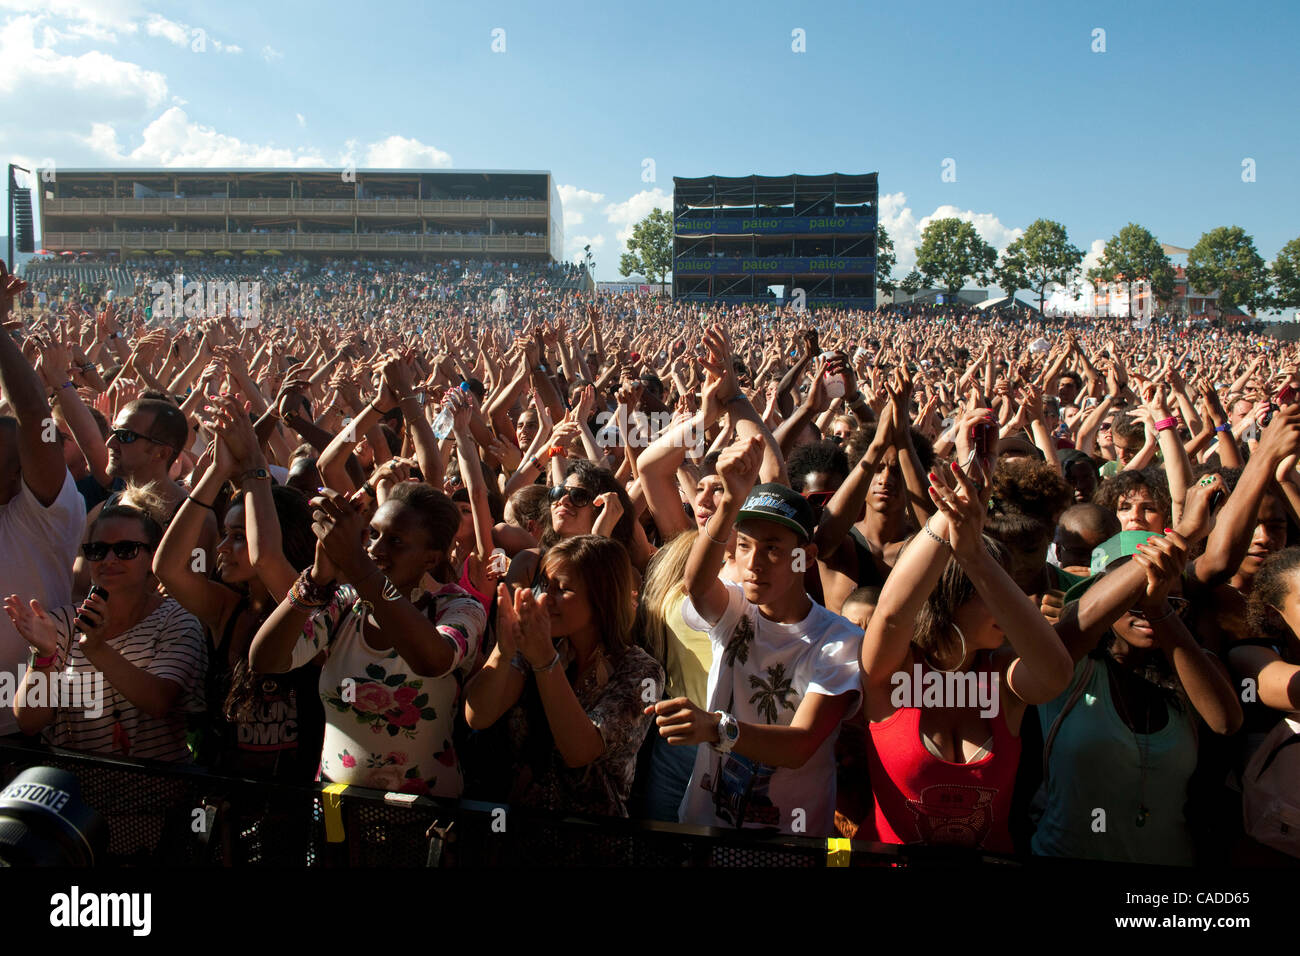 July 20, 2010 - Nyon, Nyon, Switzerland - Thousands of  fans cheer during the performance  of the N.E.R.D. on the PALEO festival in NYON. .PalÅ½o Festival is today one of EuropeÃ•s most important musical events. Since its creation, the Festival has been growing in a regular and managed way, gaining  Stock Photo